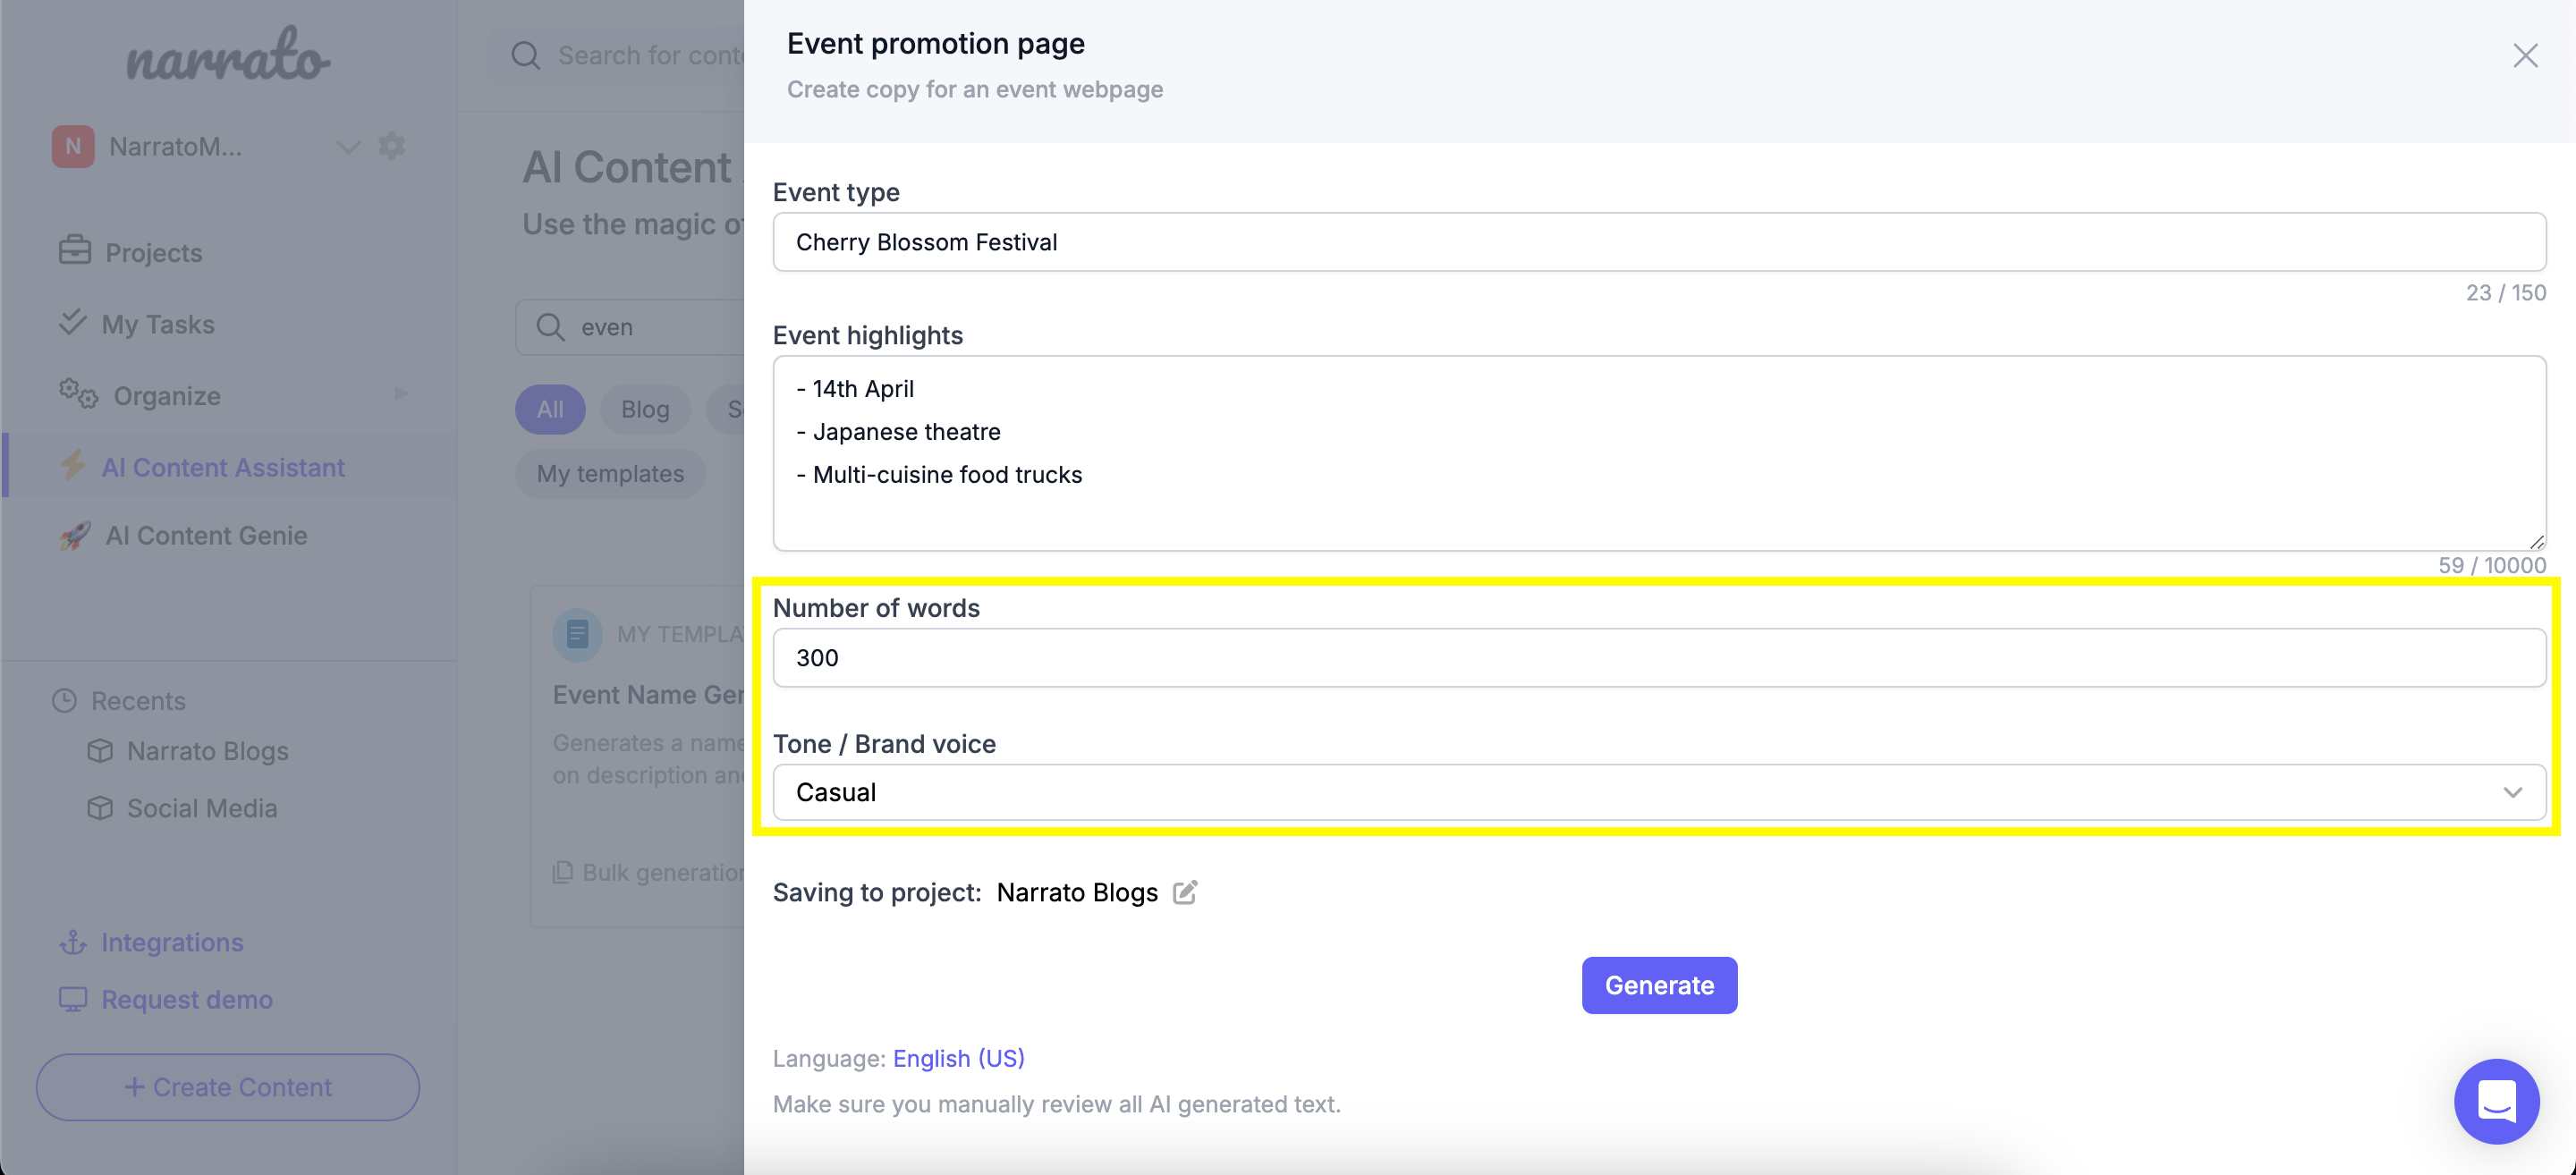 Specifying the length of the webpage to the AI event promotion webpage generator